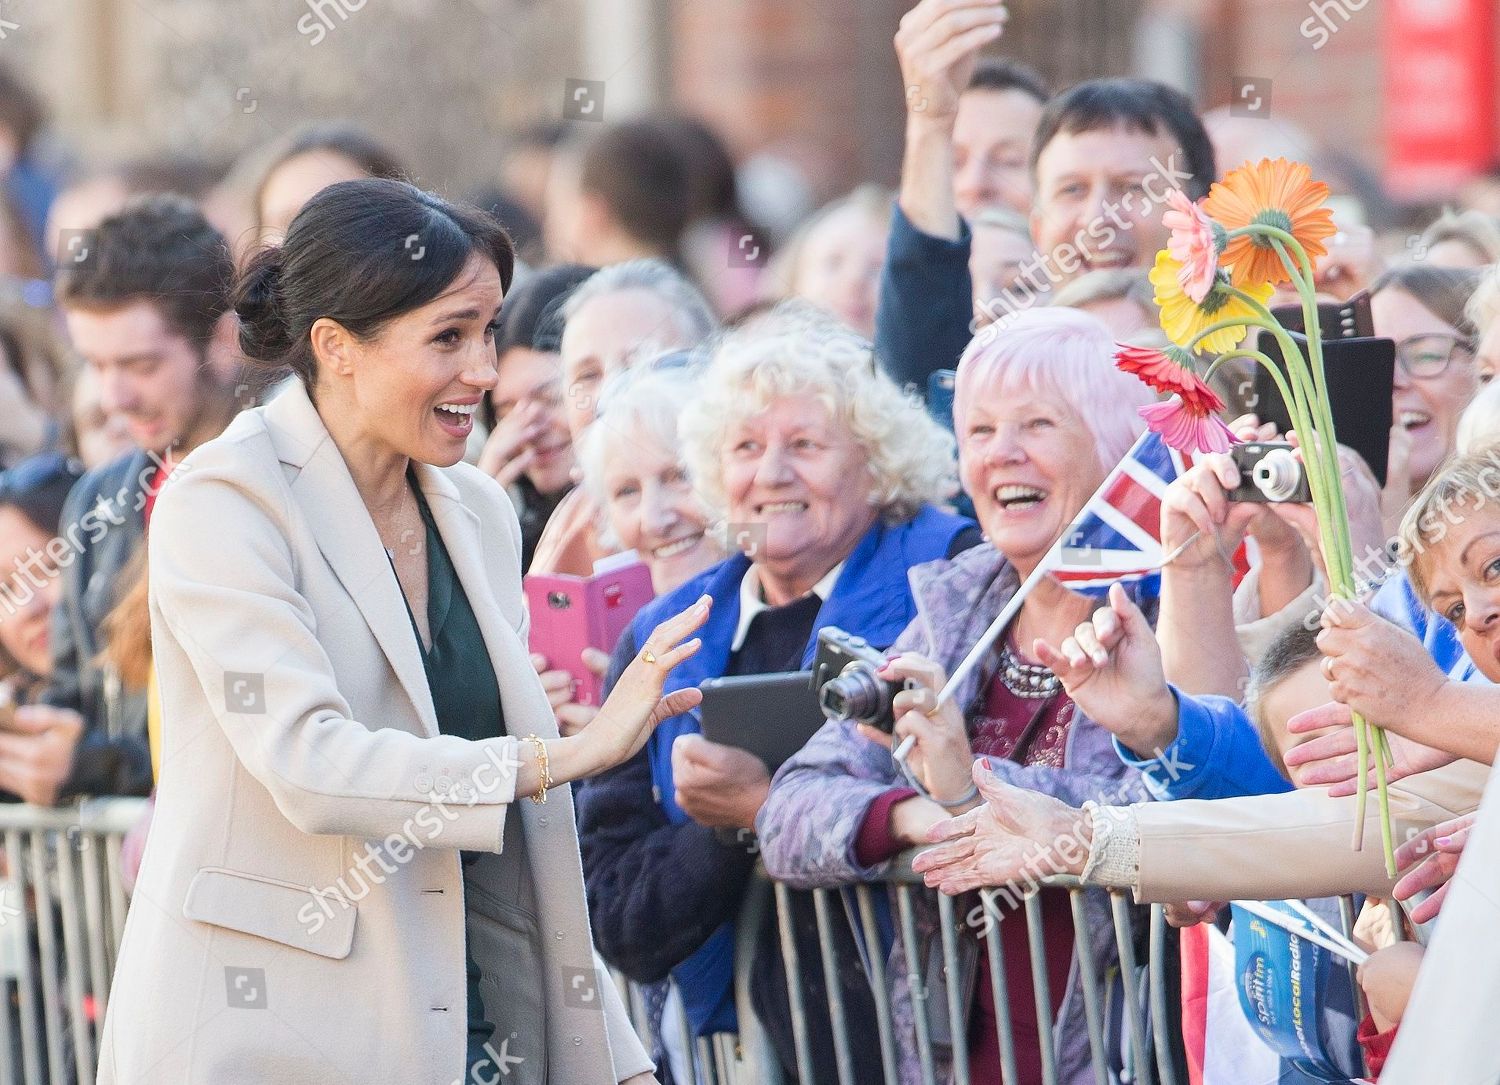 prince-harry-and-meghan-duchess-of-sussex-visit-to-sussex-uk-shutterstock-editorial-9912893y.jpg